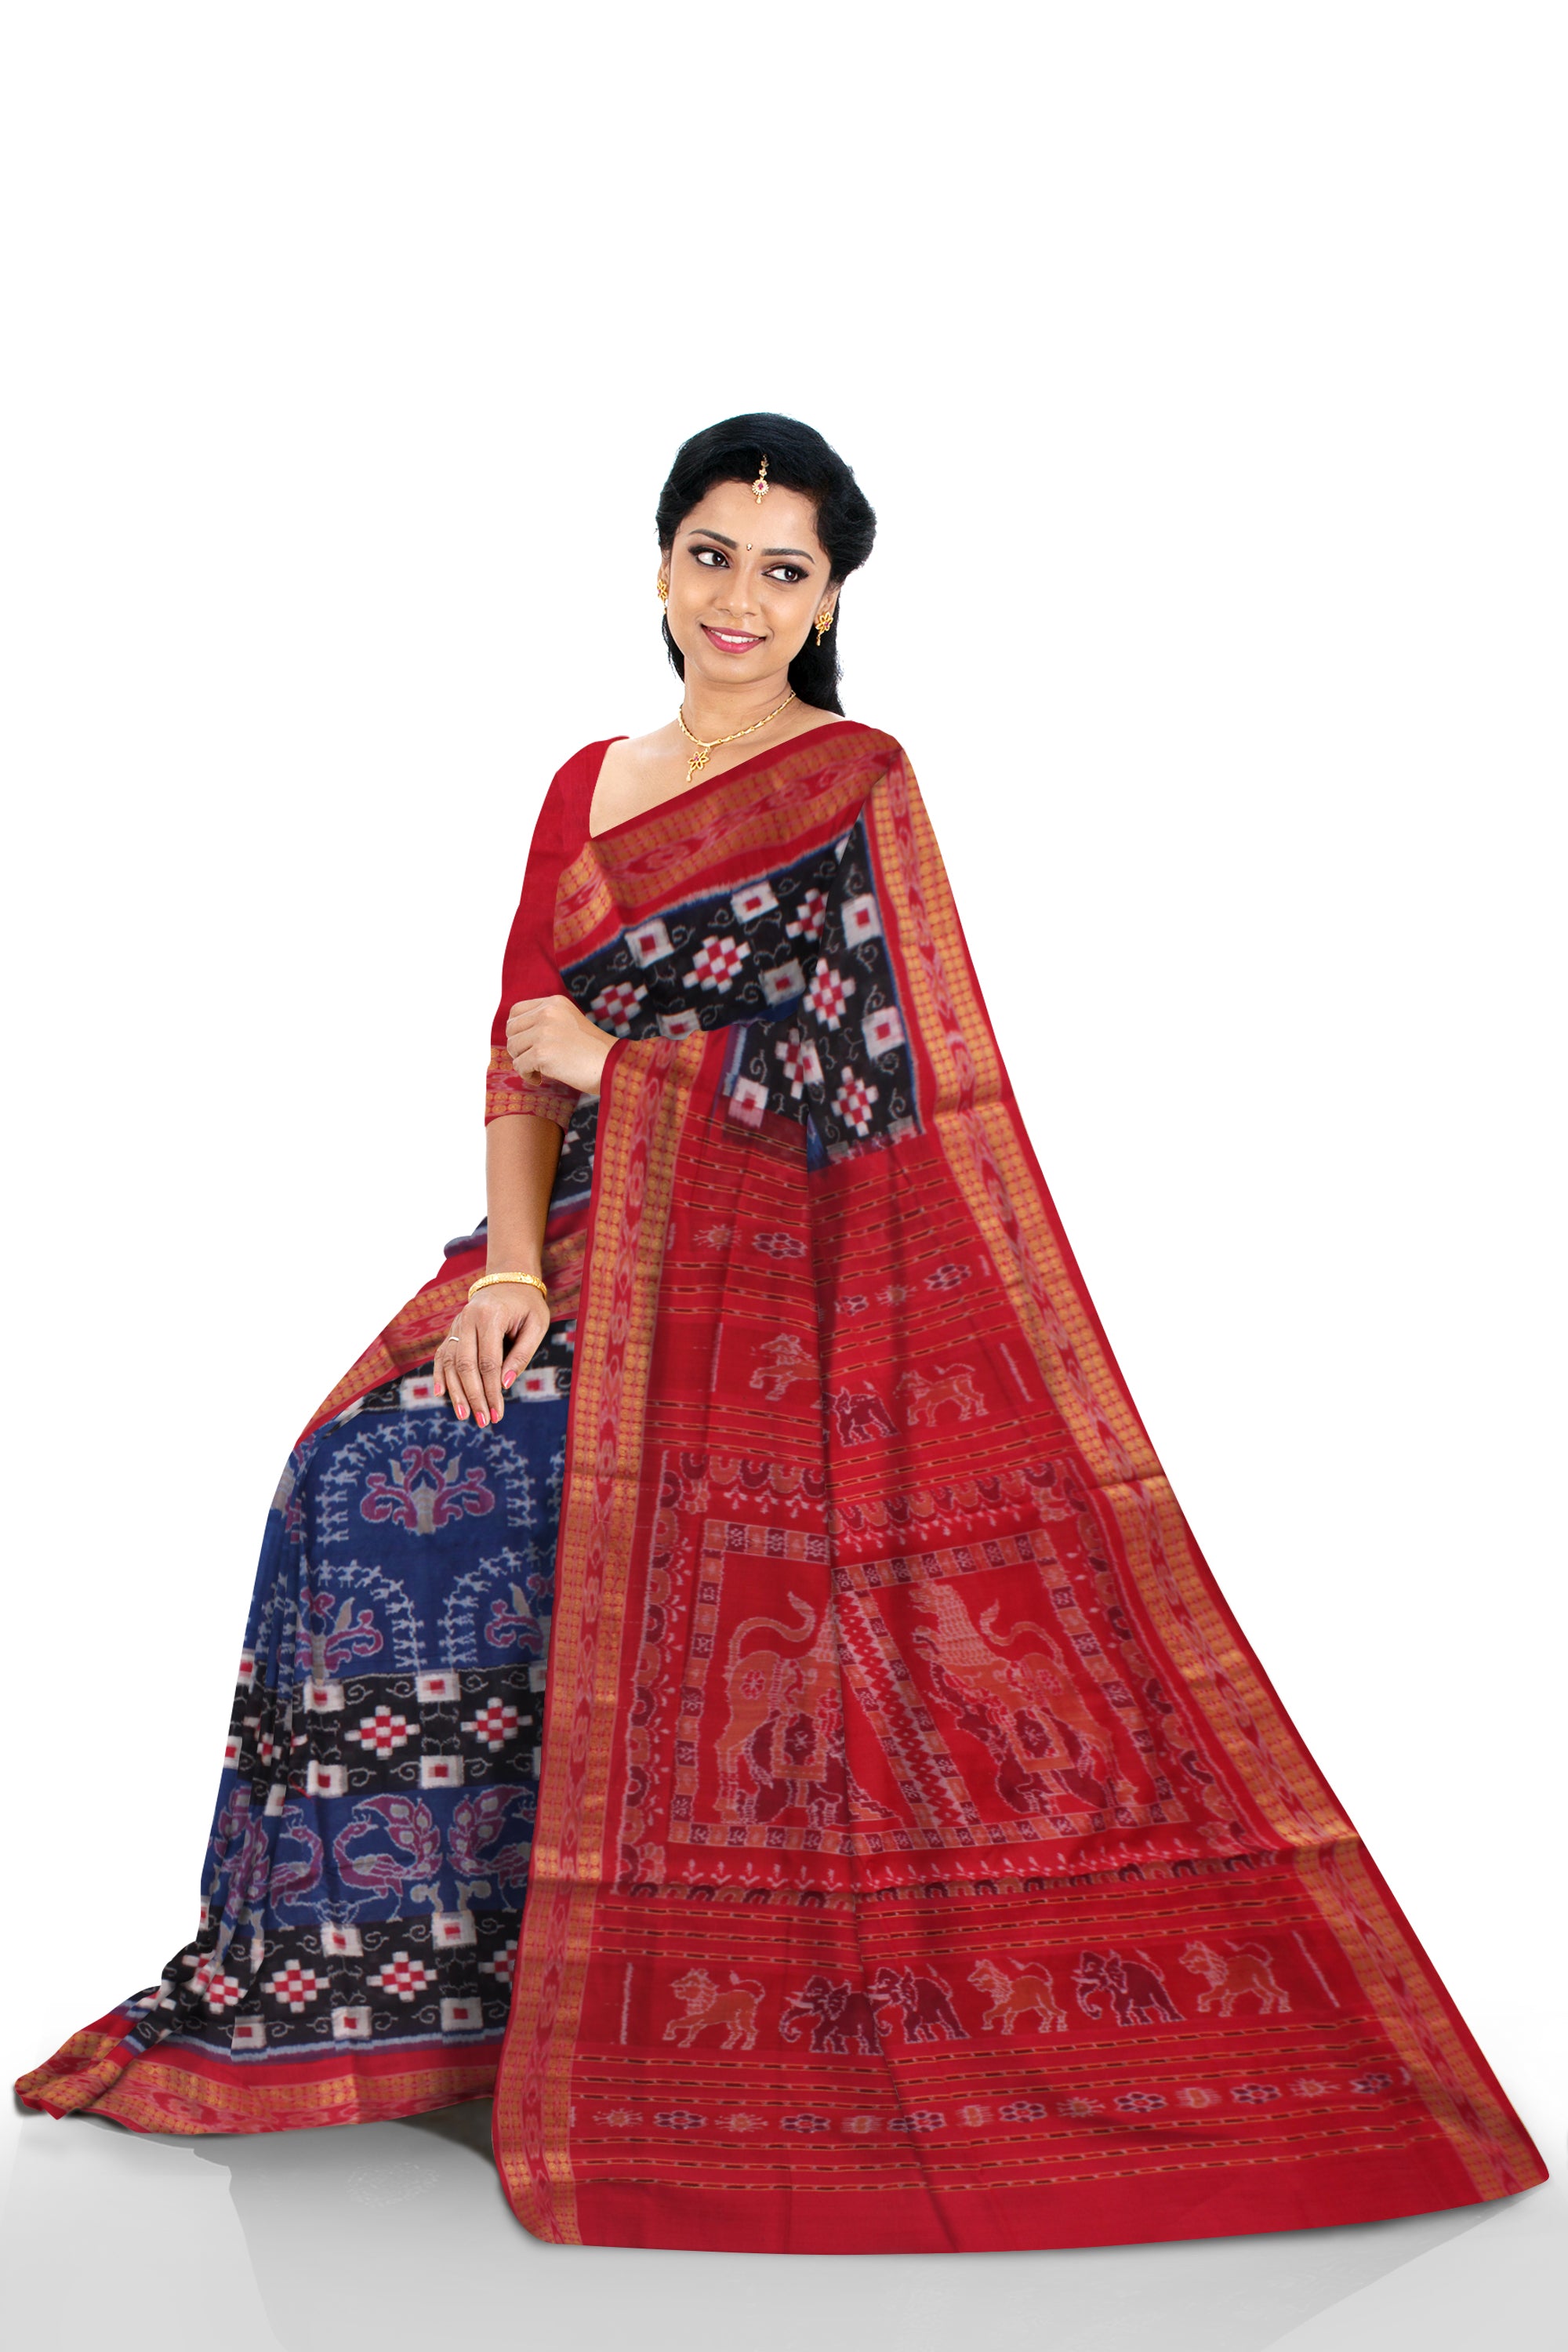 PEACOCK, TERRACOTTA AND PASAPALI PATTERN PURE COTTON SAREE IS SAPPHIRE BLUE,BLACK AND RED COLOR BASE.AVAILABLE WITH MATCHING BLOUSE PIECE. - Koshali Arts & Crafts Enterprise